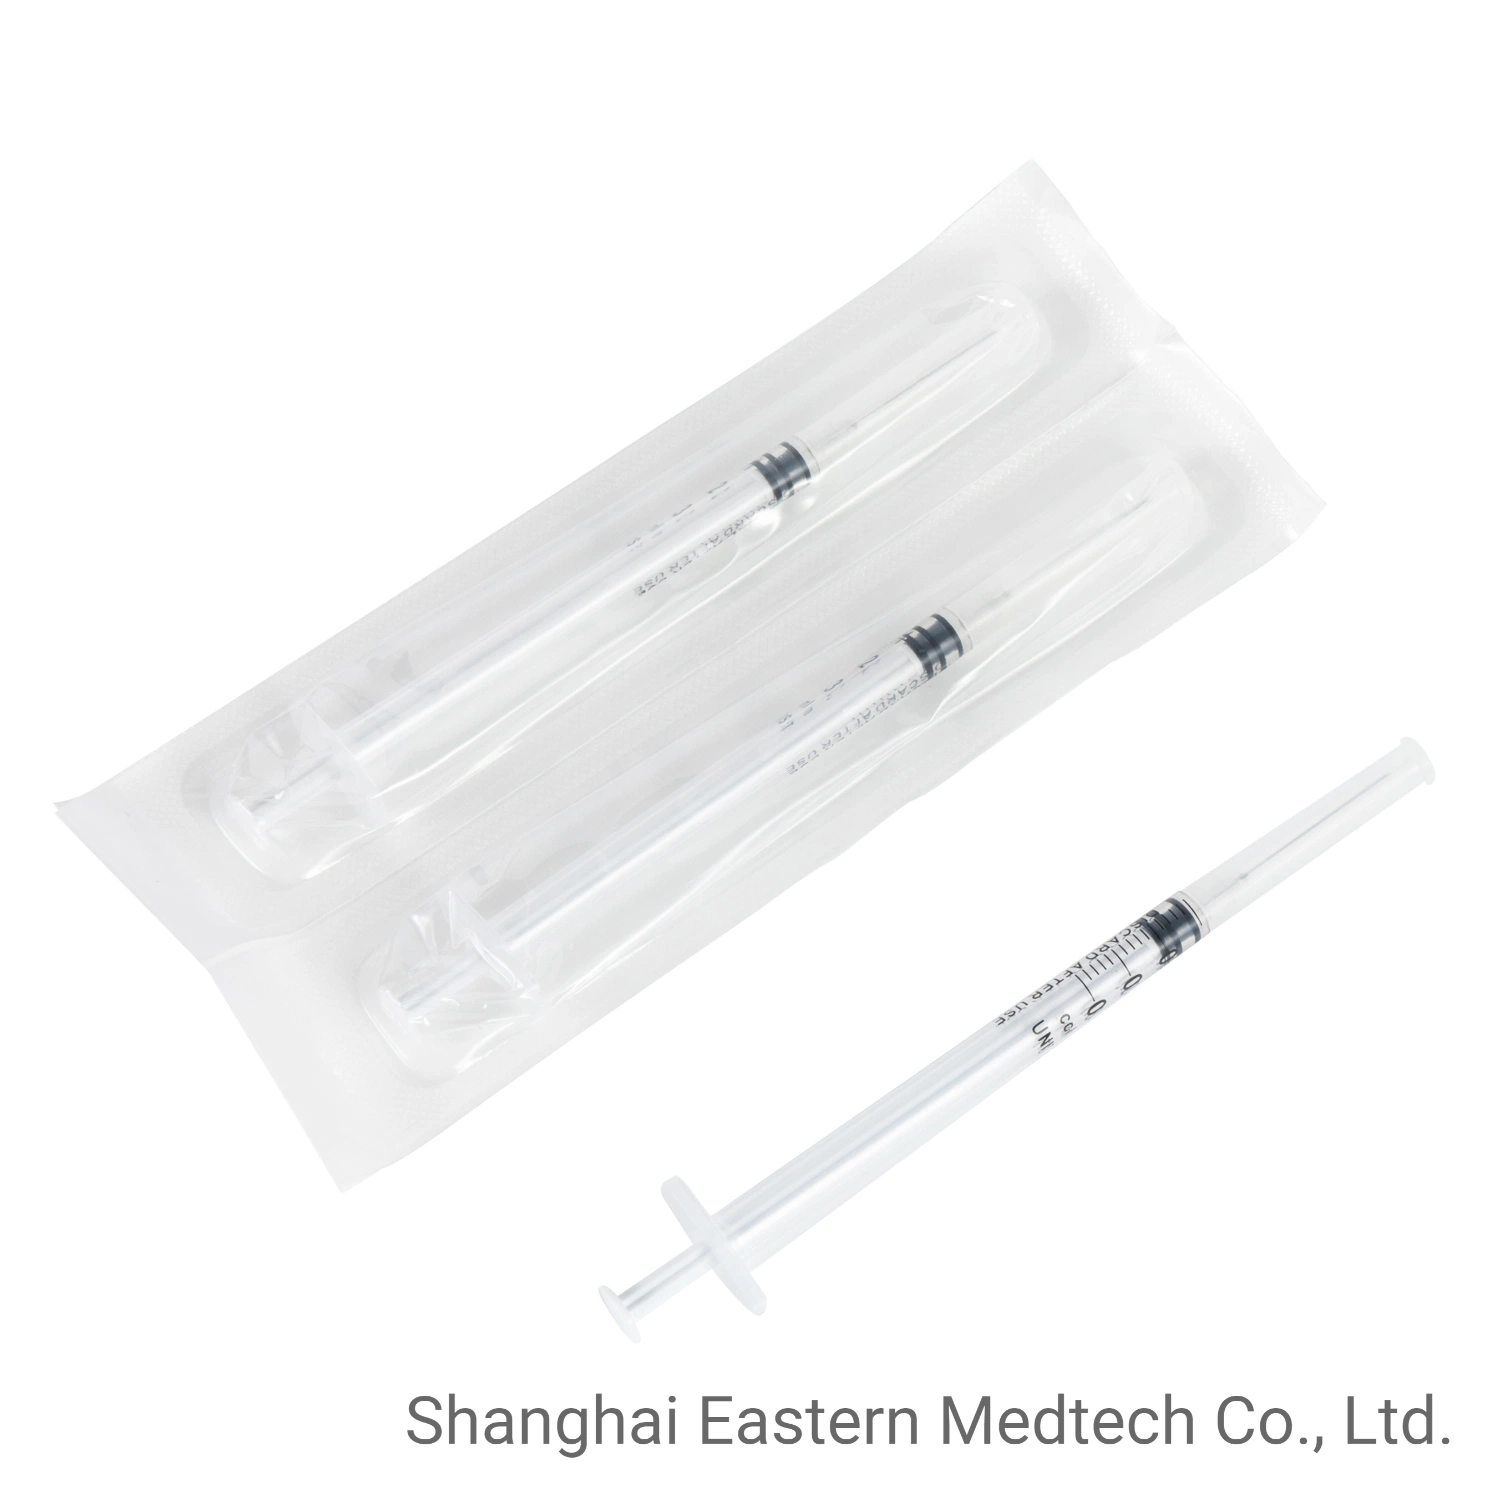 Hospital Use Disposable Medical Products, Latex Free, for Single Use, CE Marked Fixed Needle Lds 0.5ml 25g 27g, Vaccine Syringe